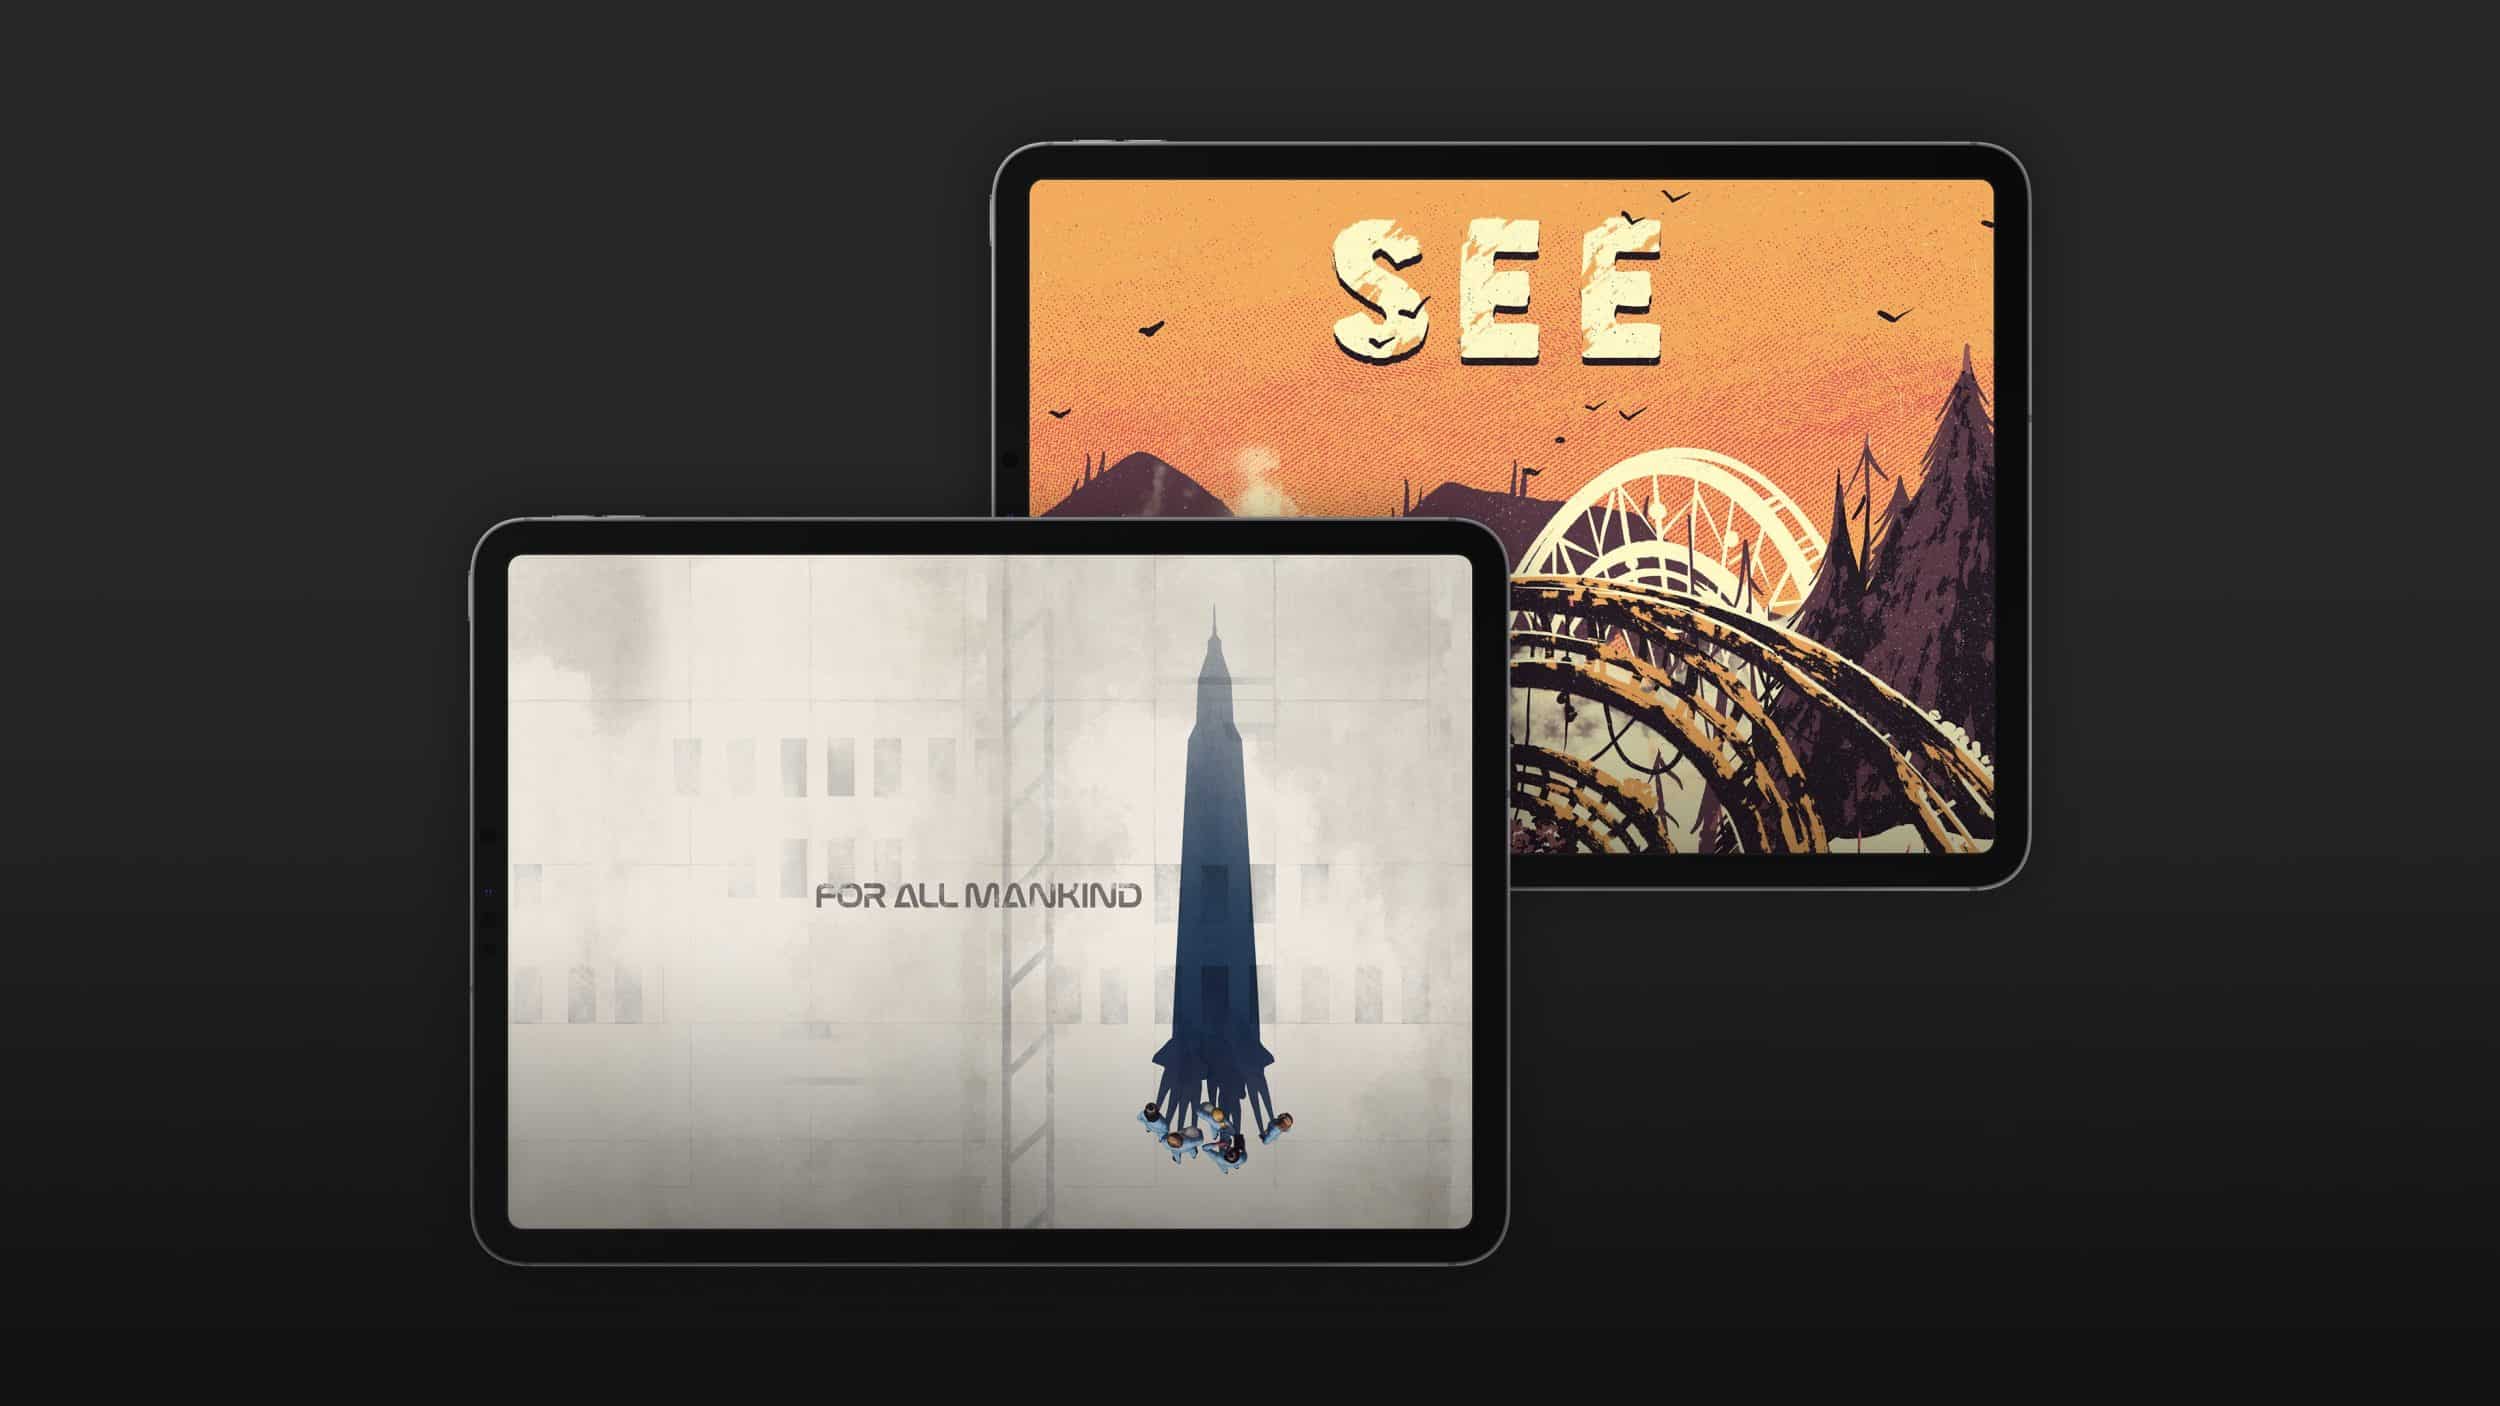 Today at Apple Features 'Apple TV+ iPad Poster Series'